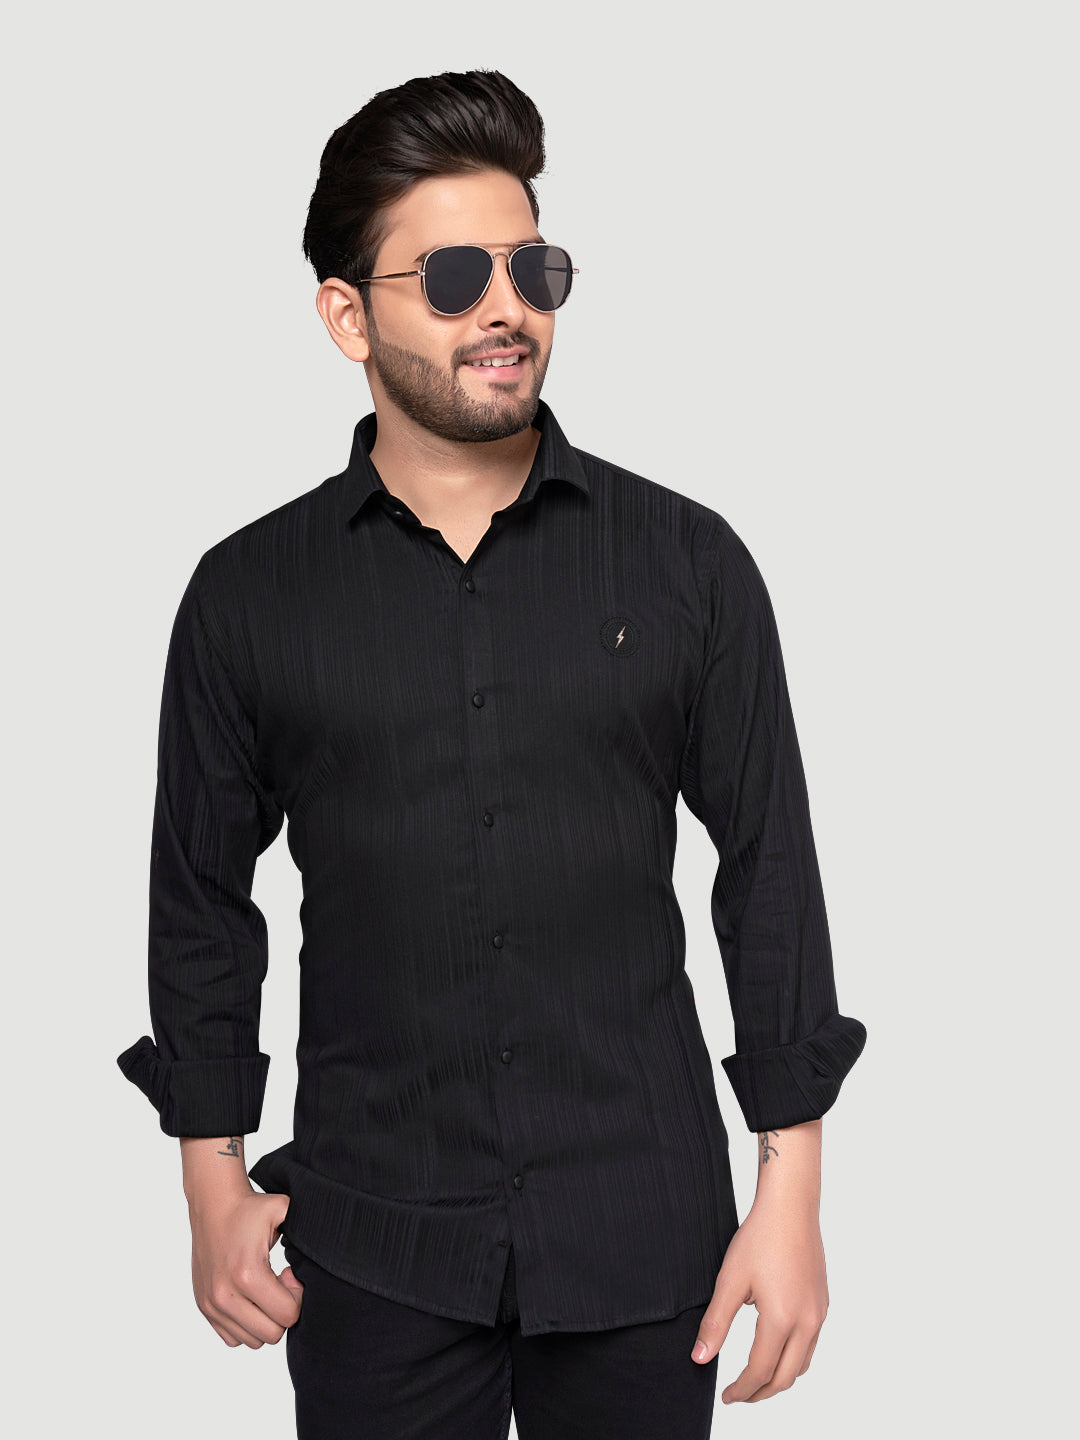 Black and White Shirts Men's Designer Shirt with Broach-4